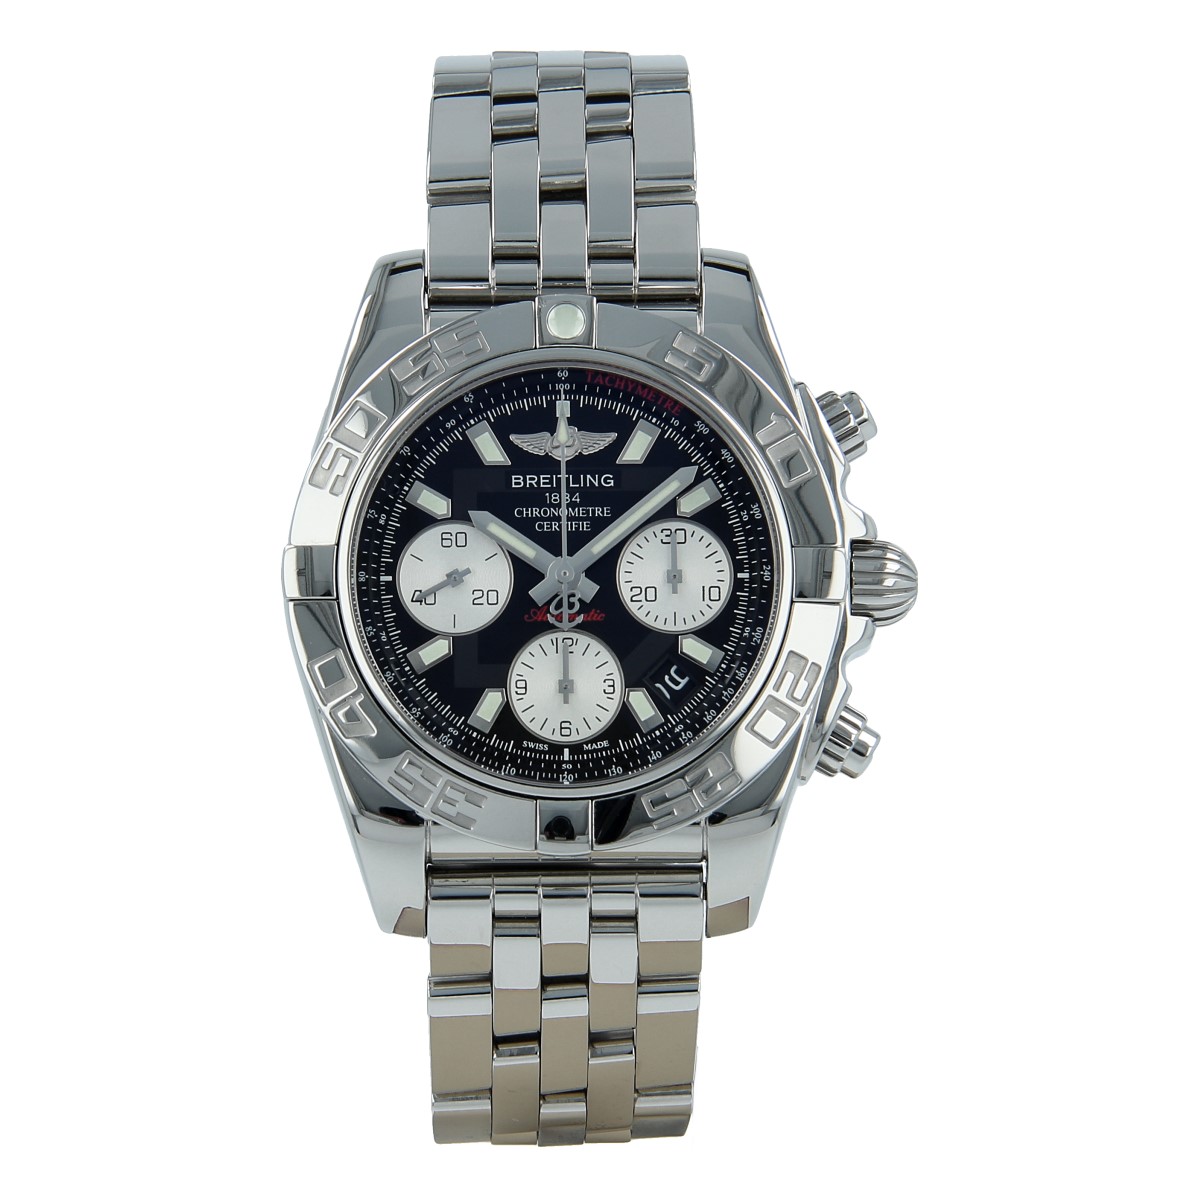 Breitling Chronomat 41 Steel | Buy pre-owned Breitling watches